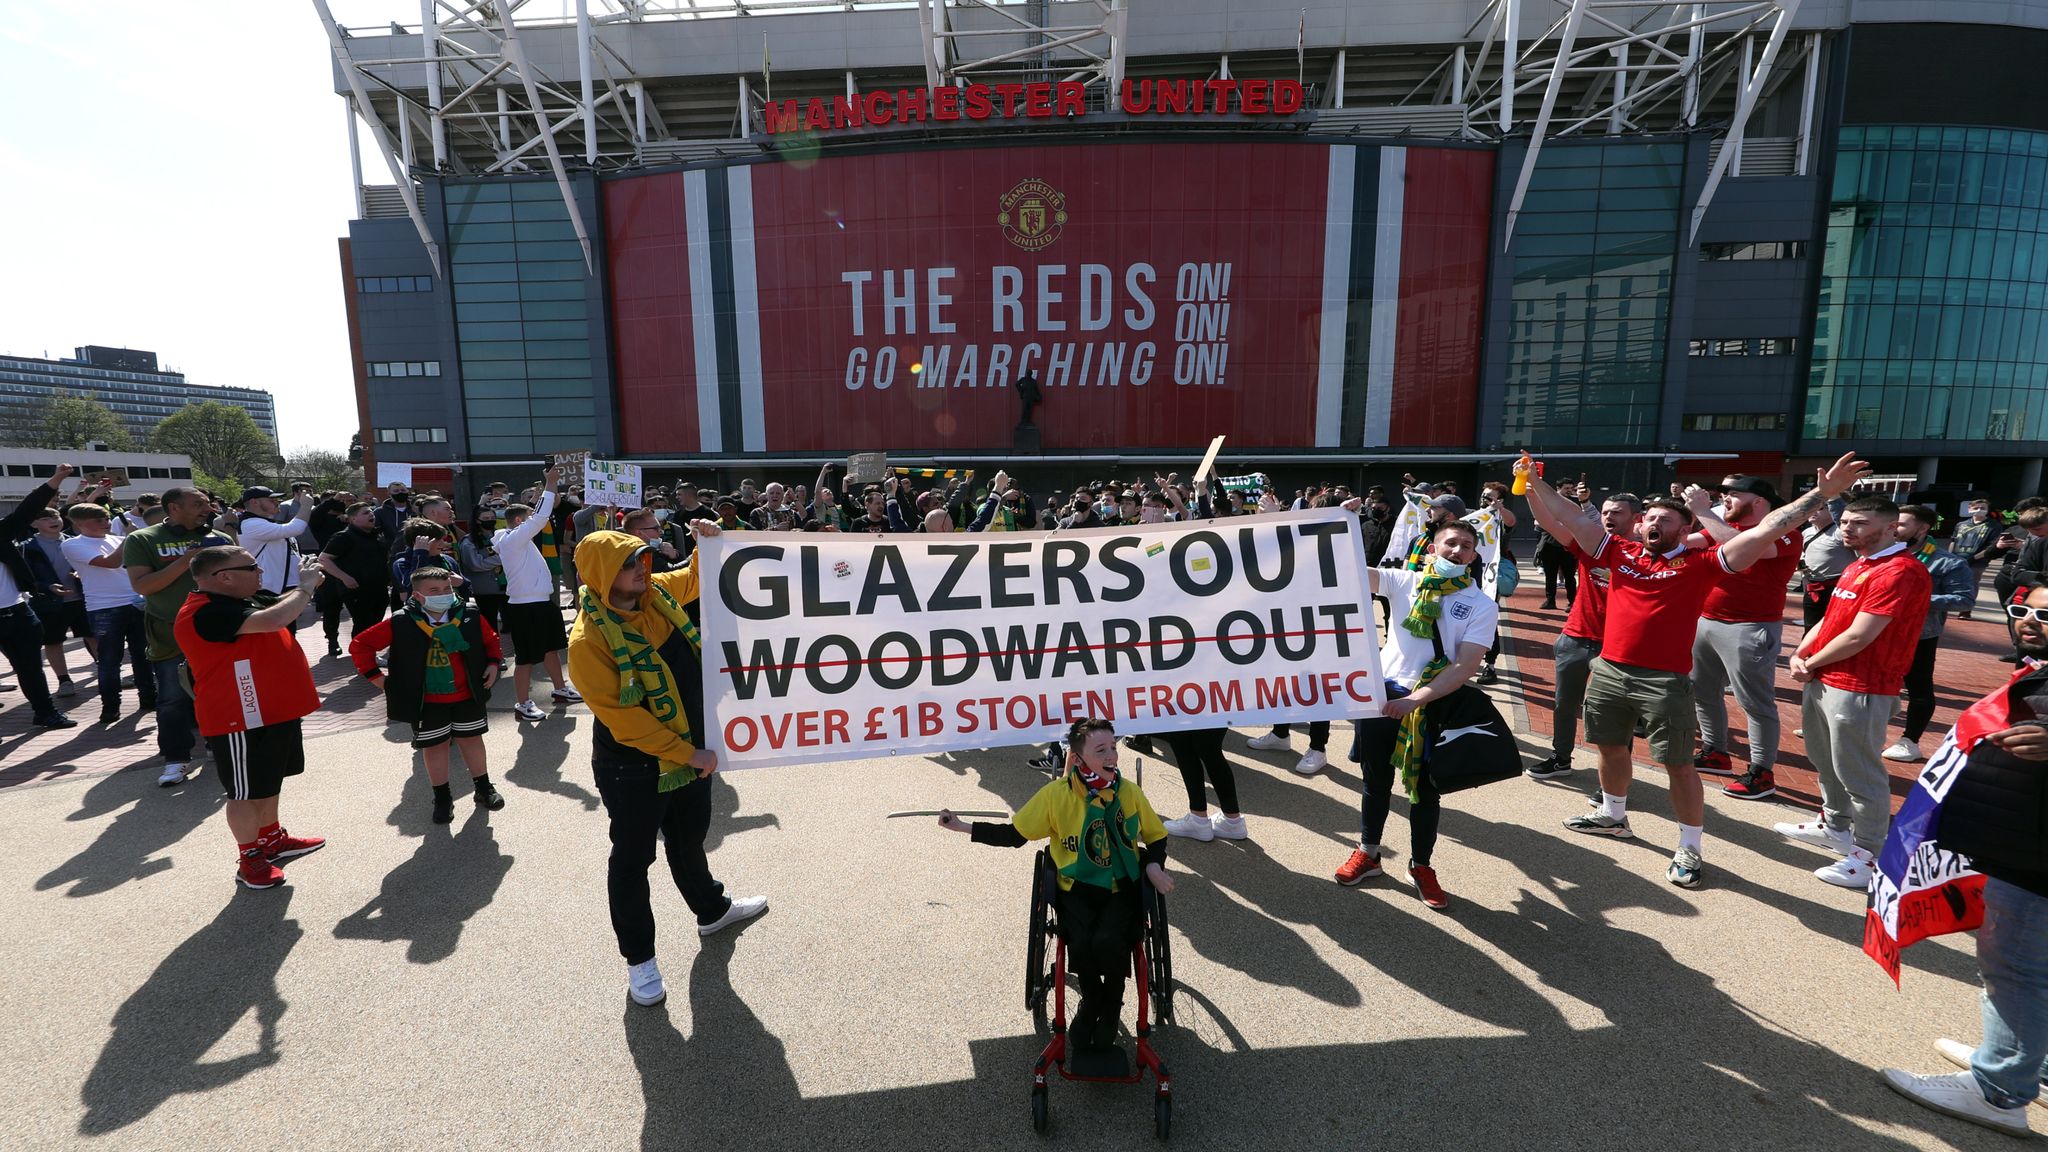 Manchester United fans staged a protest against the Glazer family's ownership before Norwich match